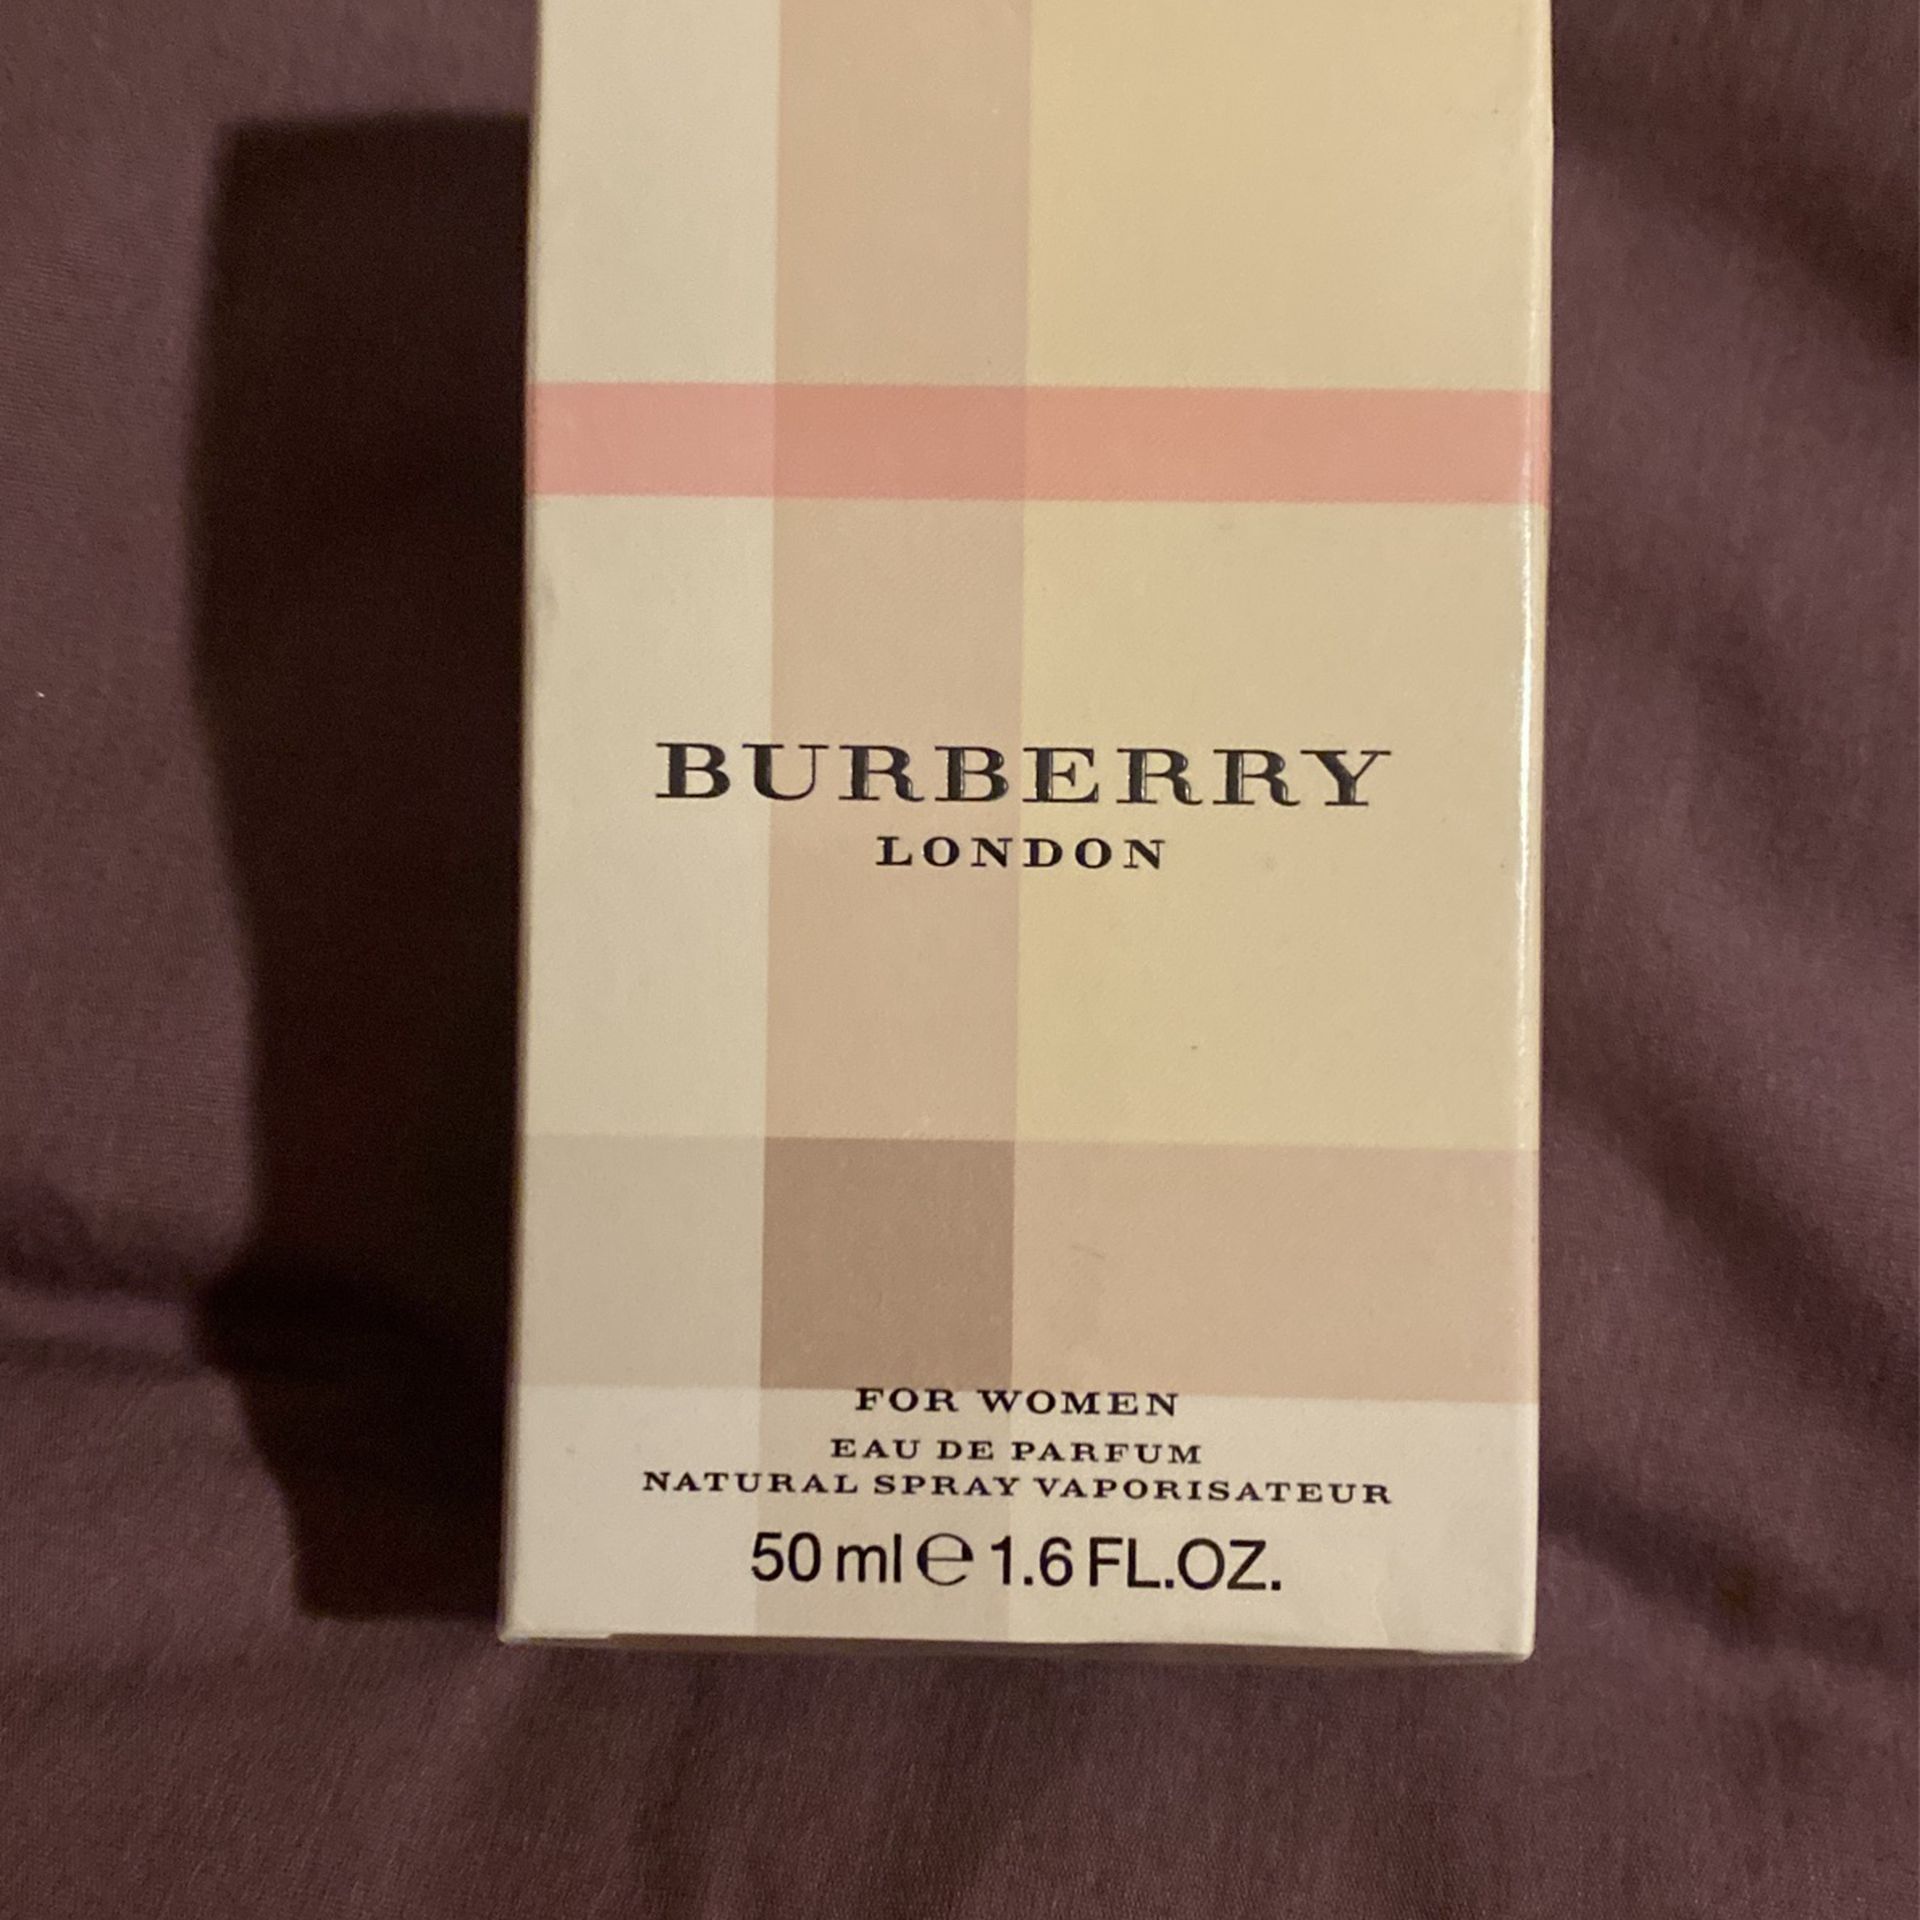 Burberry London 1.6pz / 50ml- 2 Available 